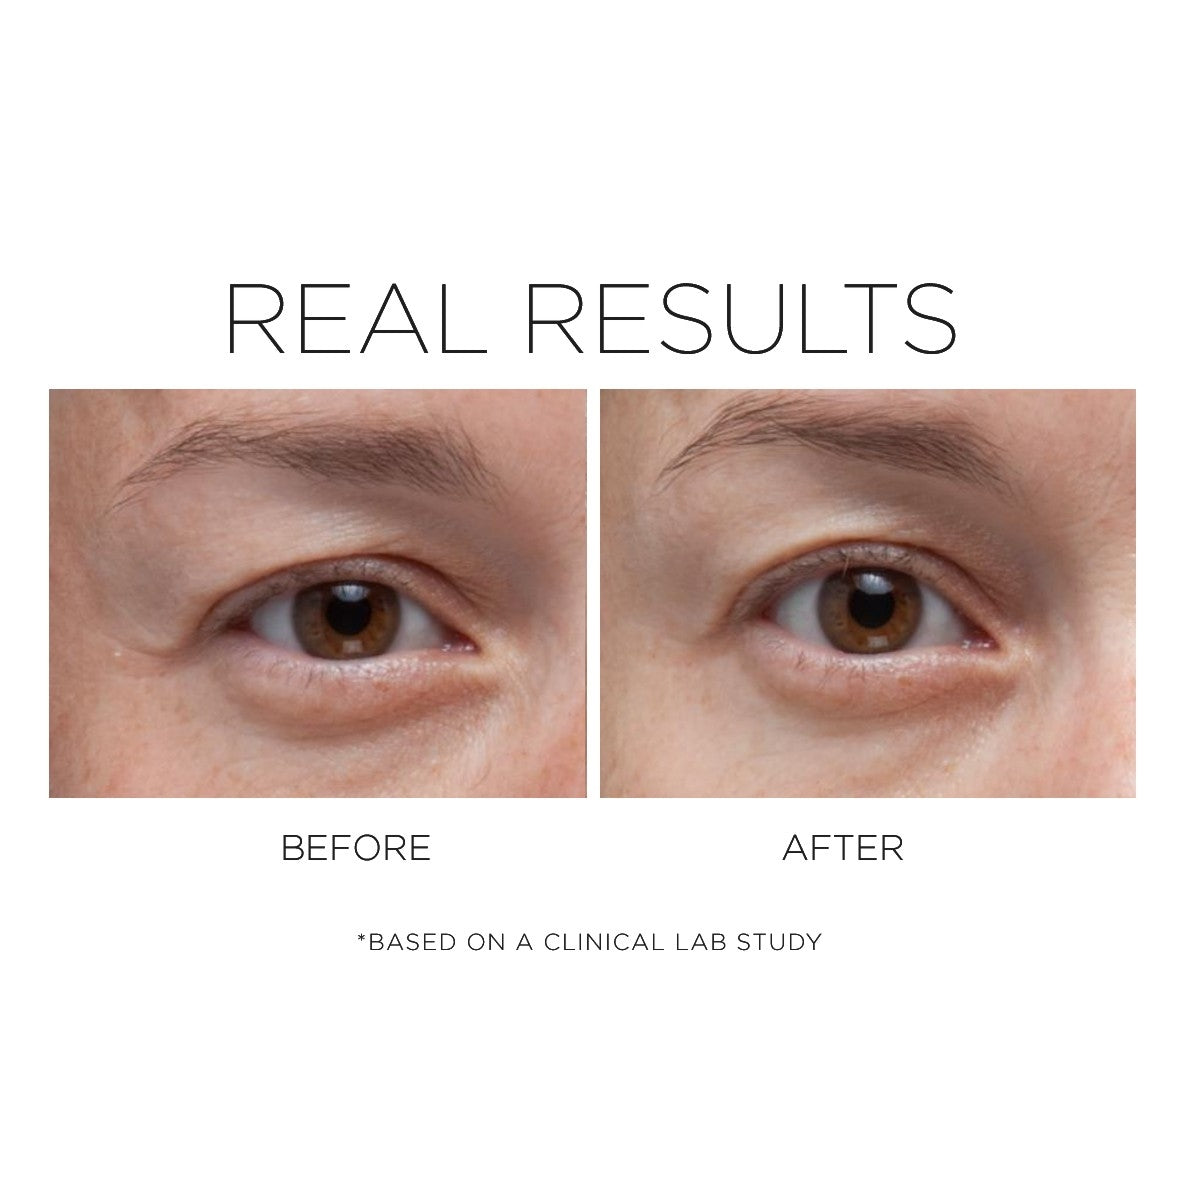 Get Real Results with Opti Crystal